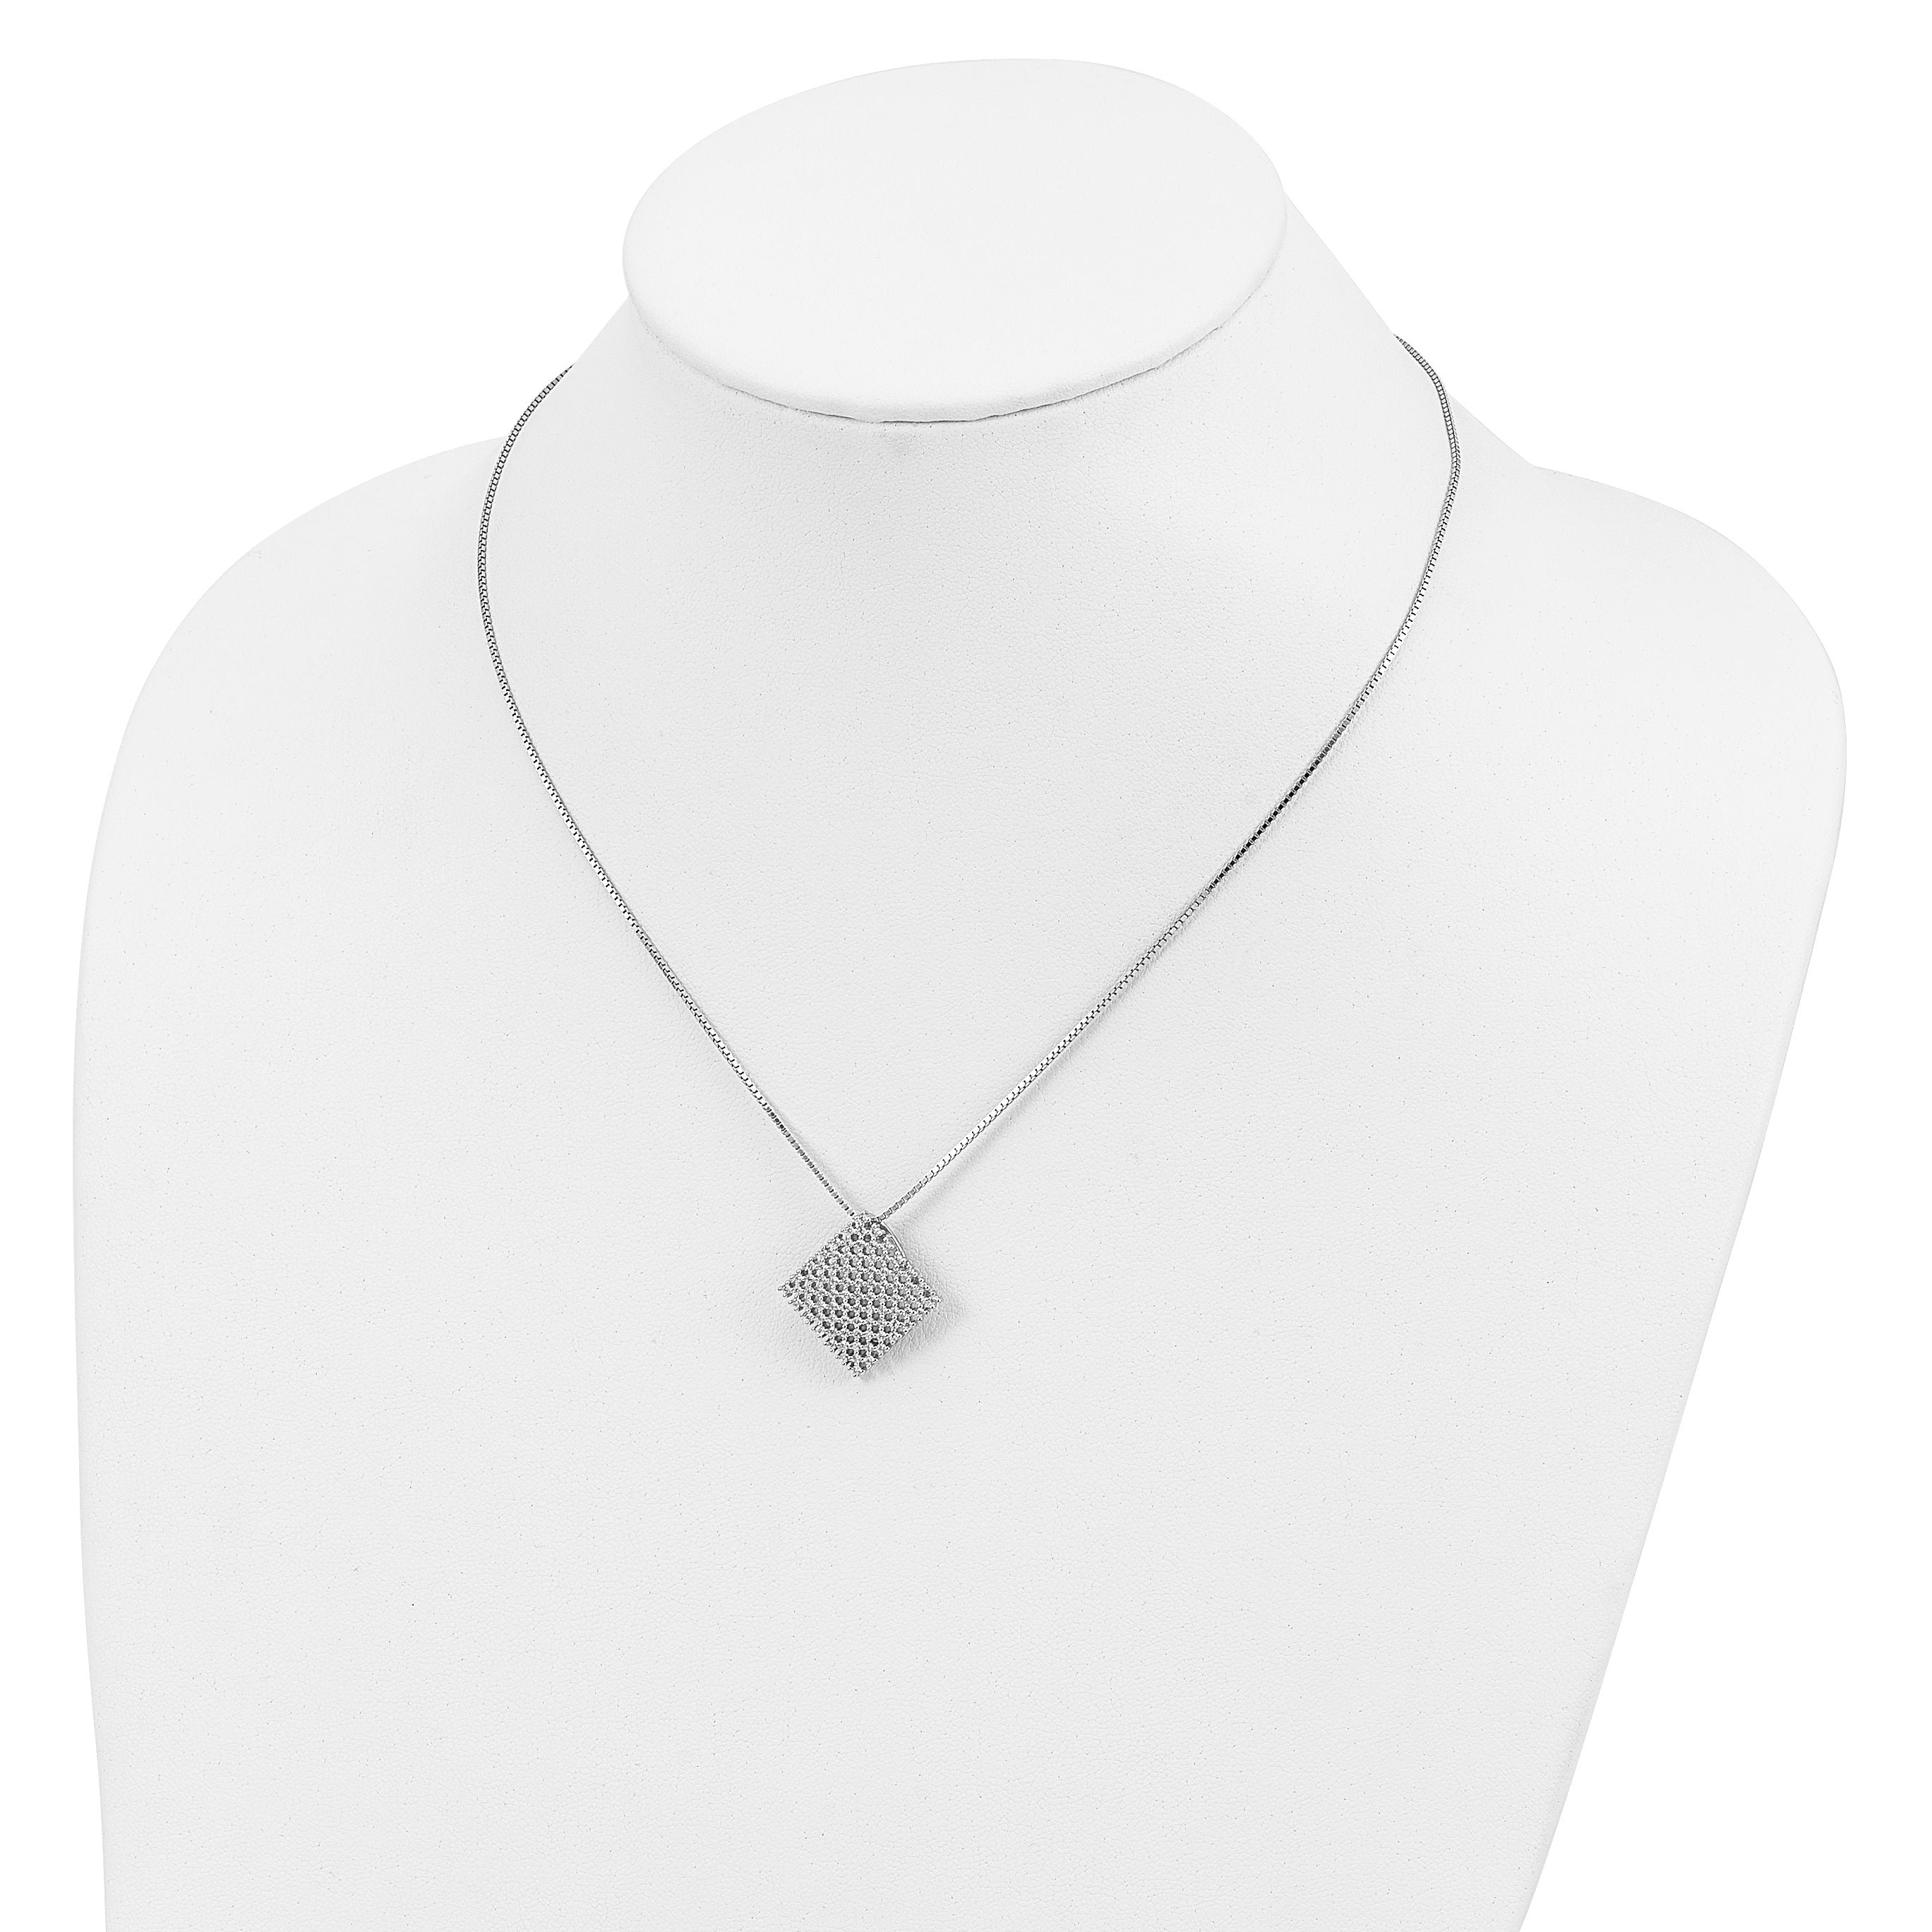 Brilliant Embers Sterling Silver Rhodium-plated 85 Stone 18 inch Micro Pav‚ CZ Necklace with 2 Inch Extender